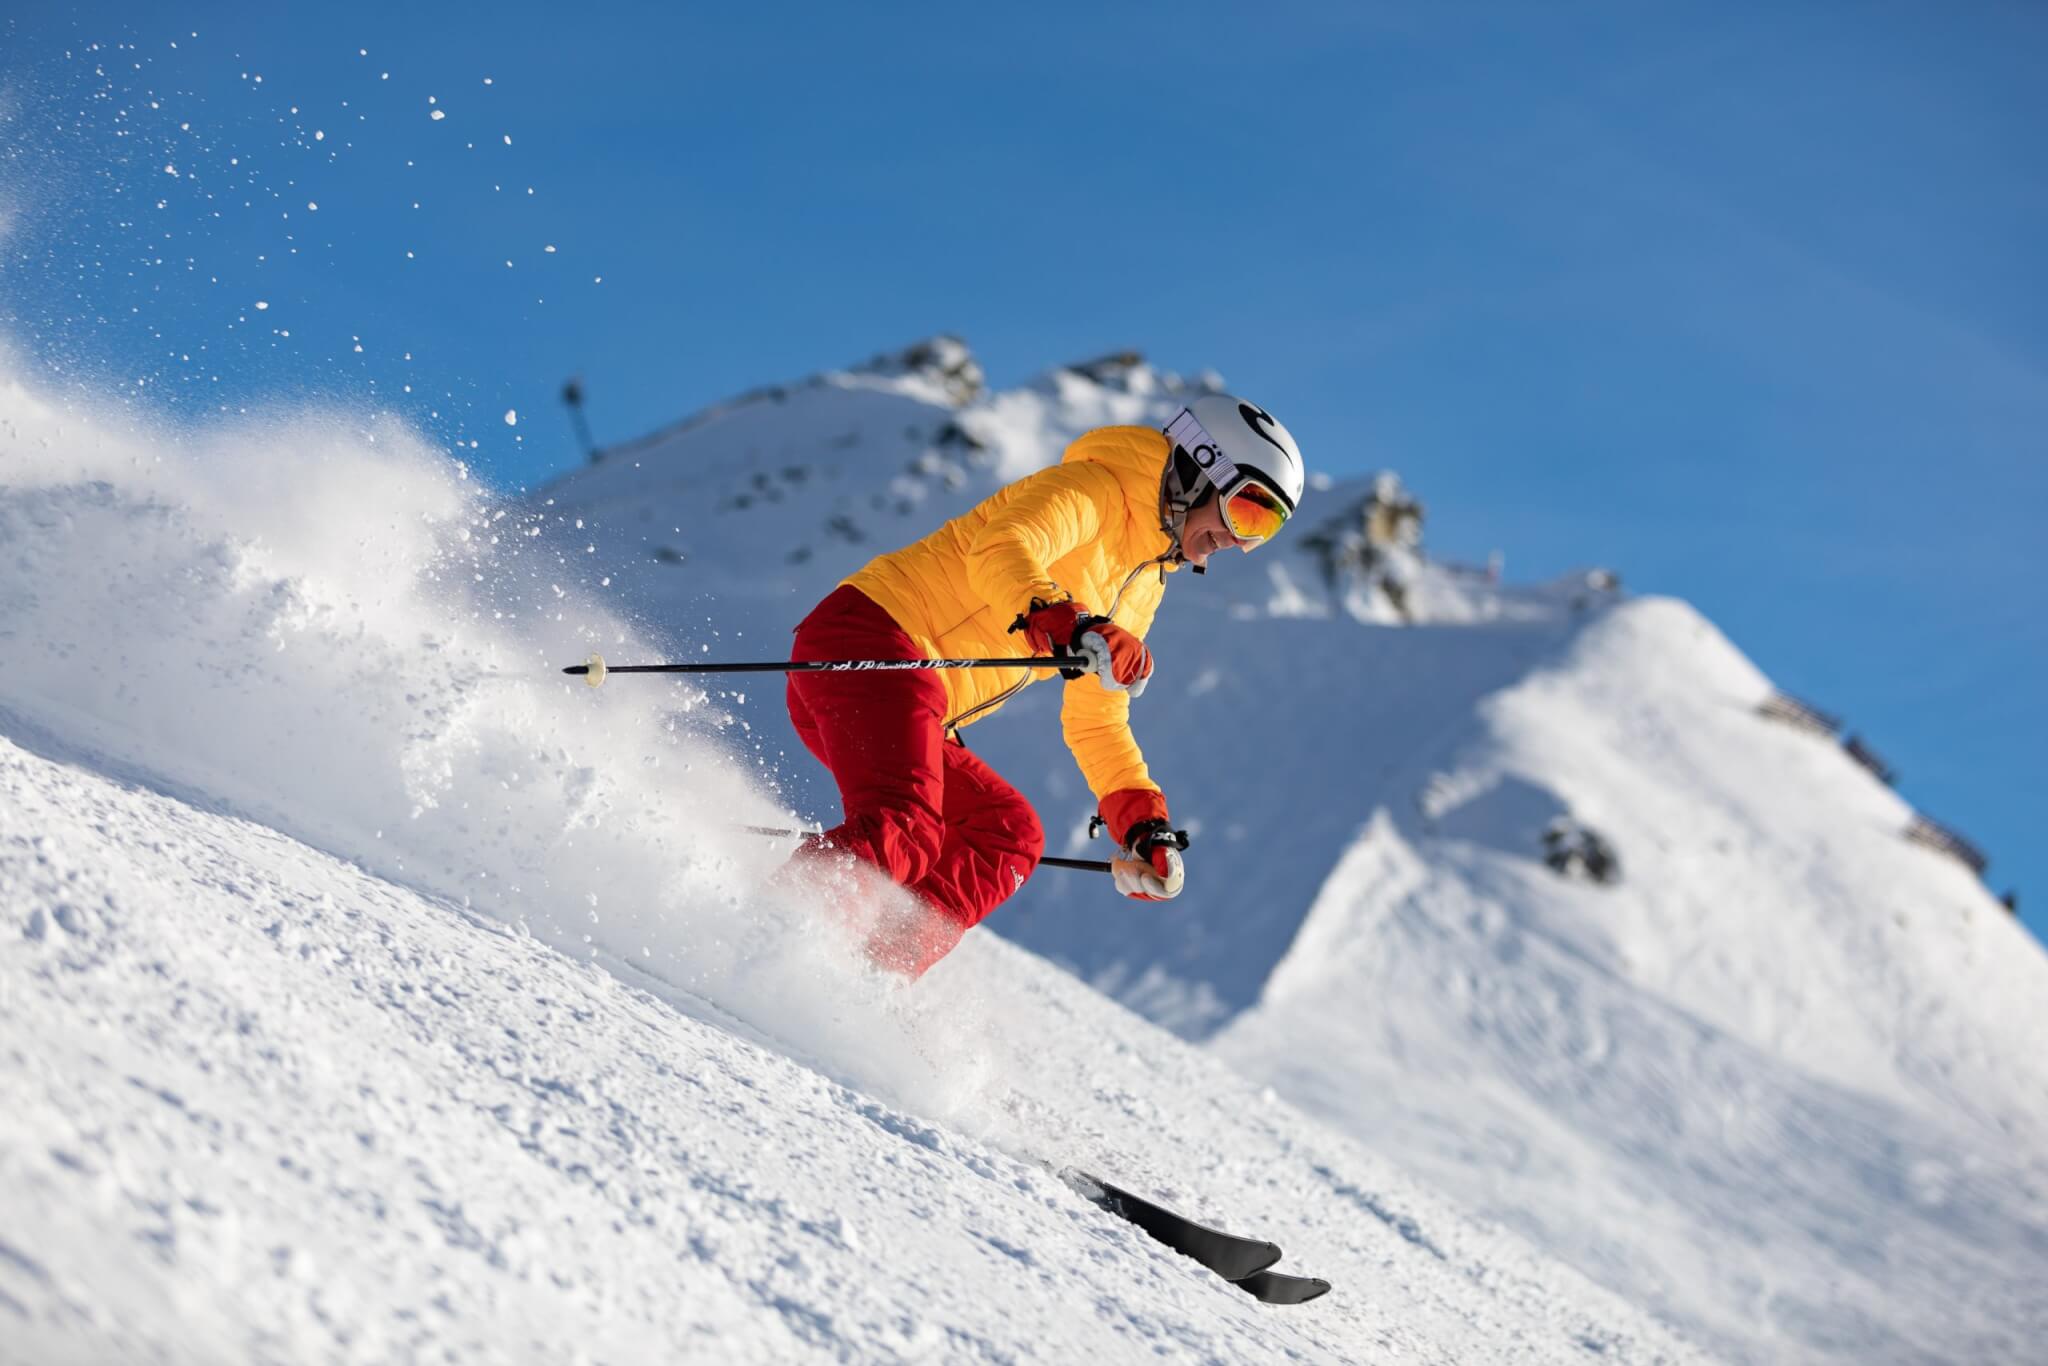 Best U.S. Ski Resorts In 2023: Top 5 Winter Vacation Spots According To Travel Experts